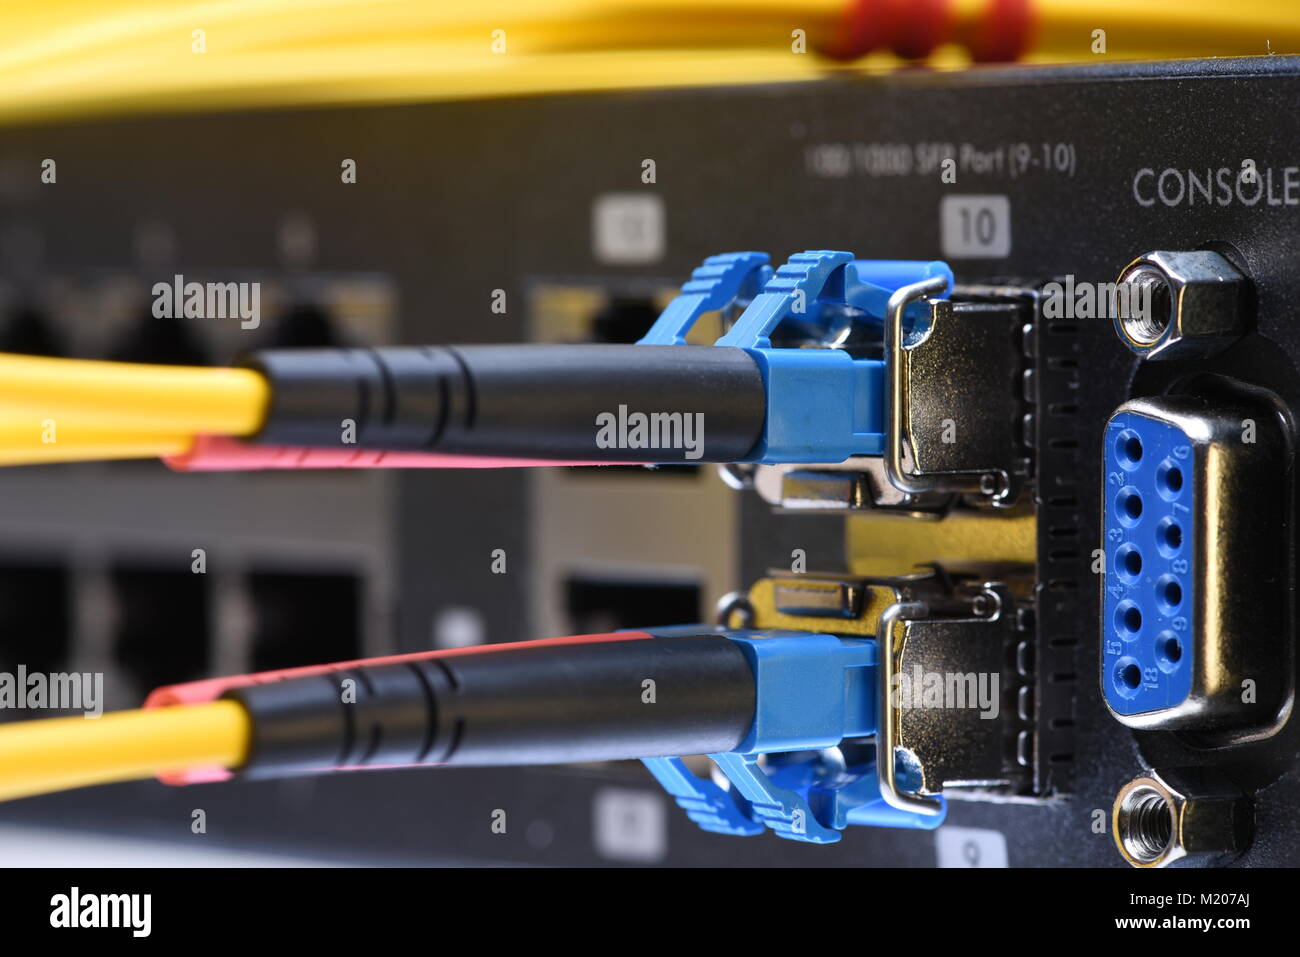 Network optic fiber cables and switch in data center close-up Stock Photo